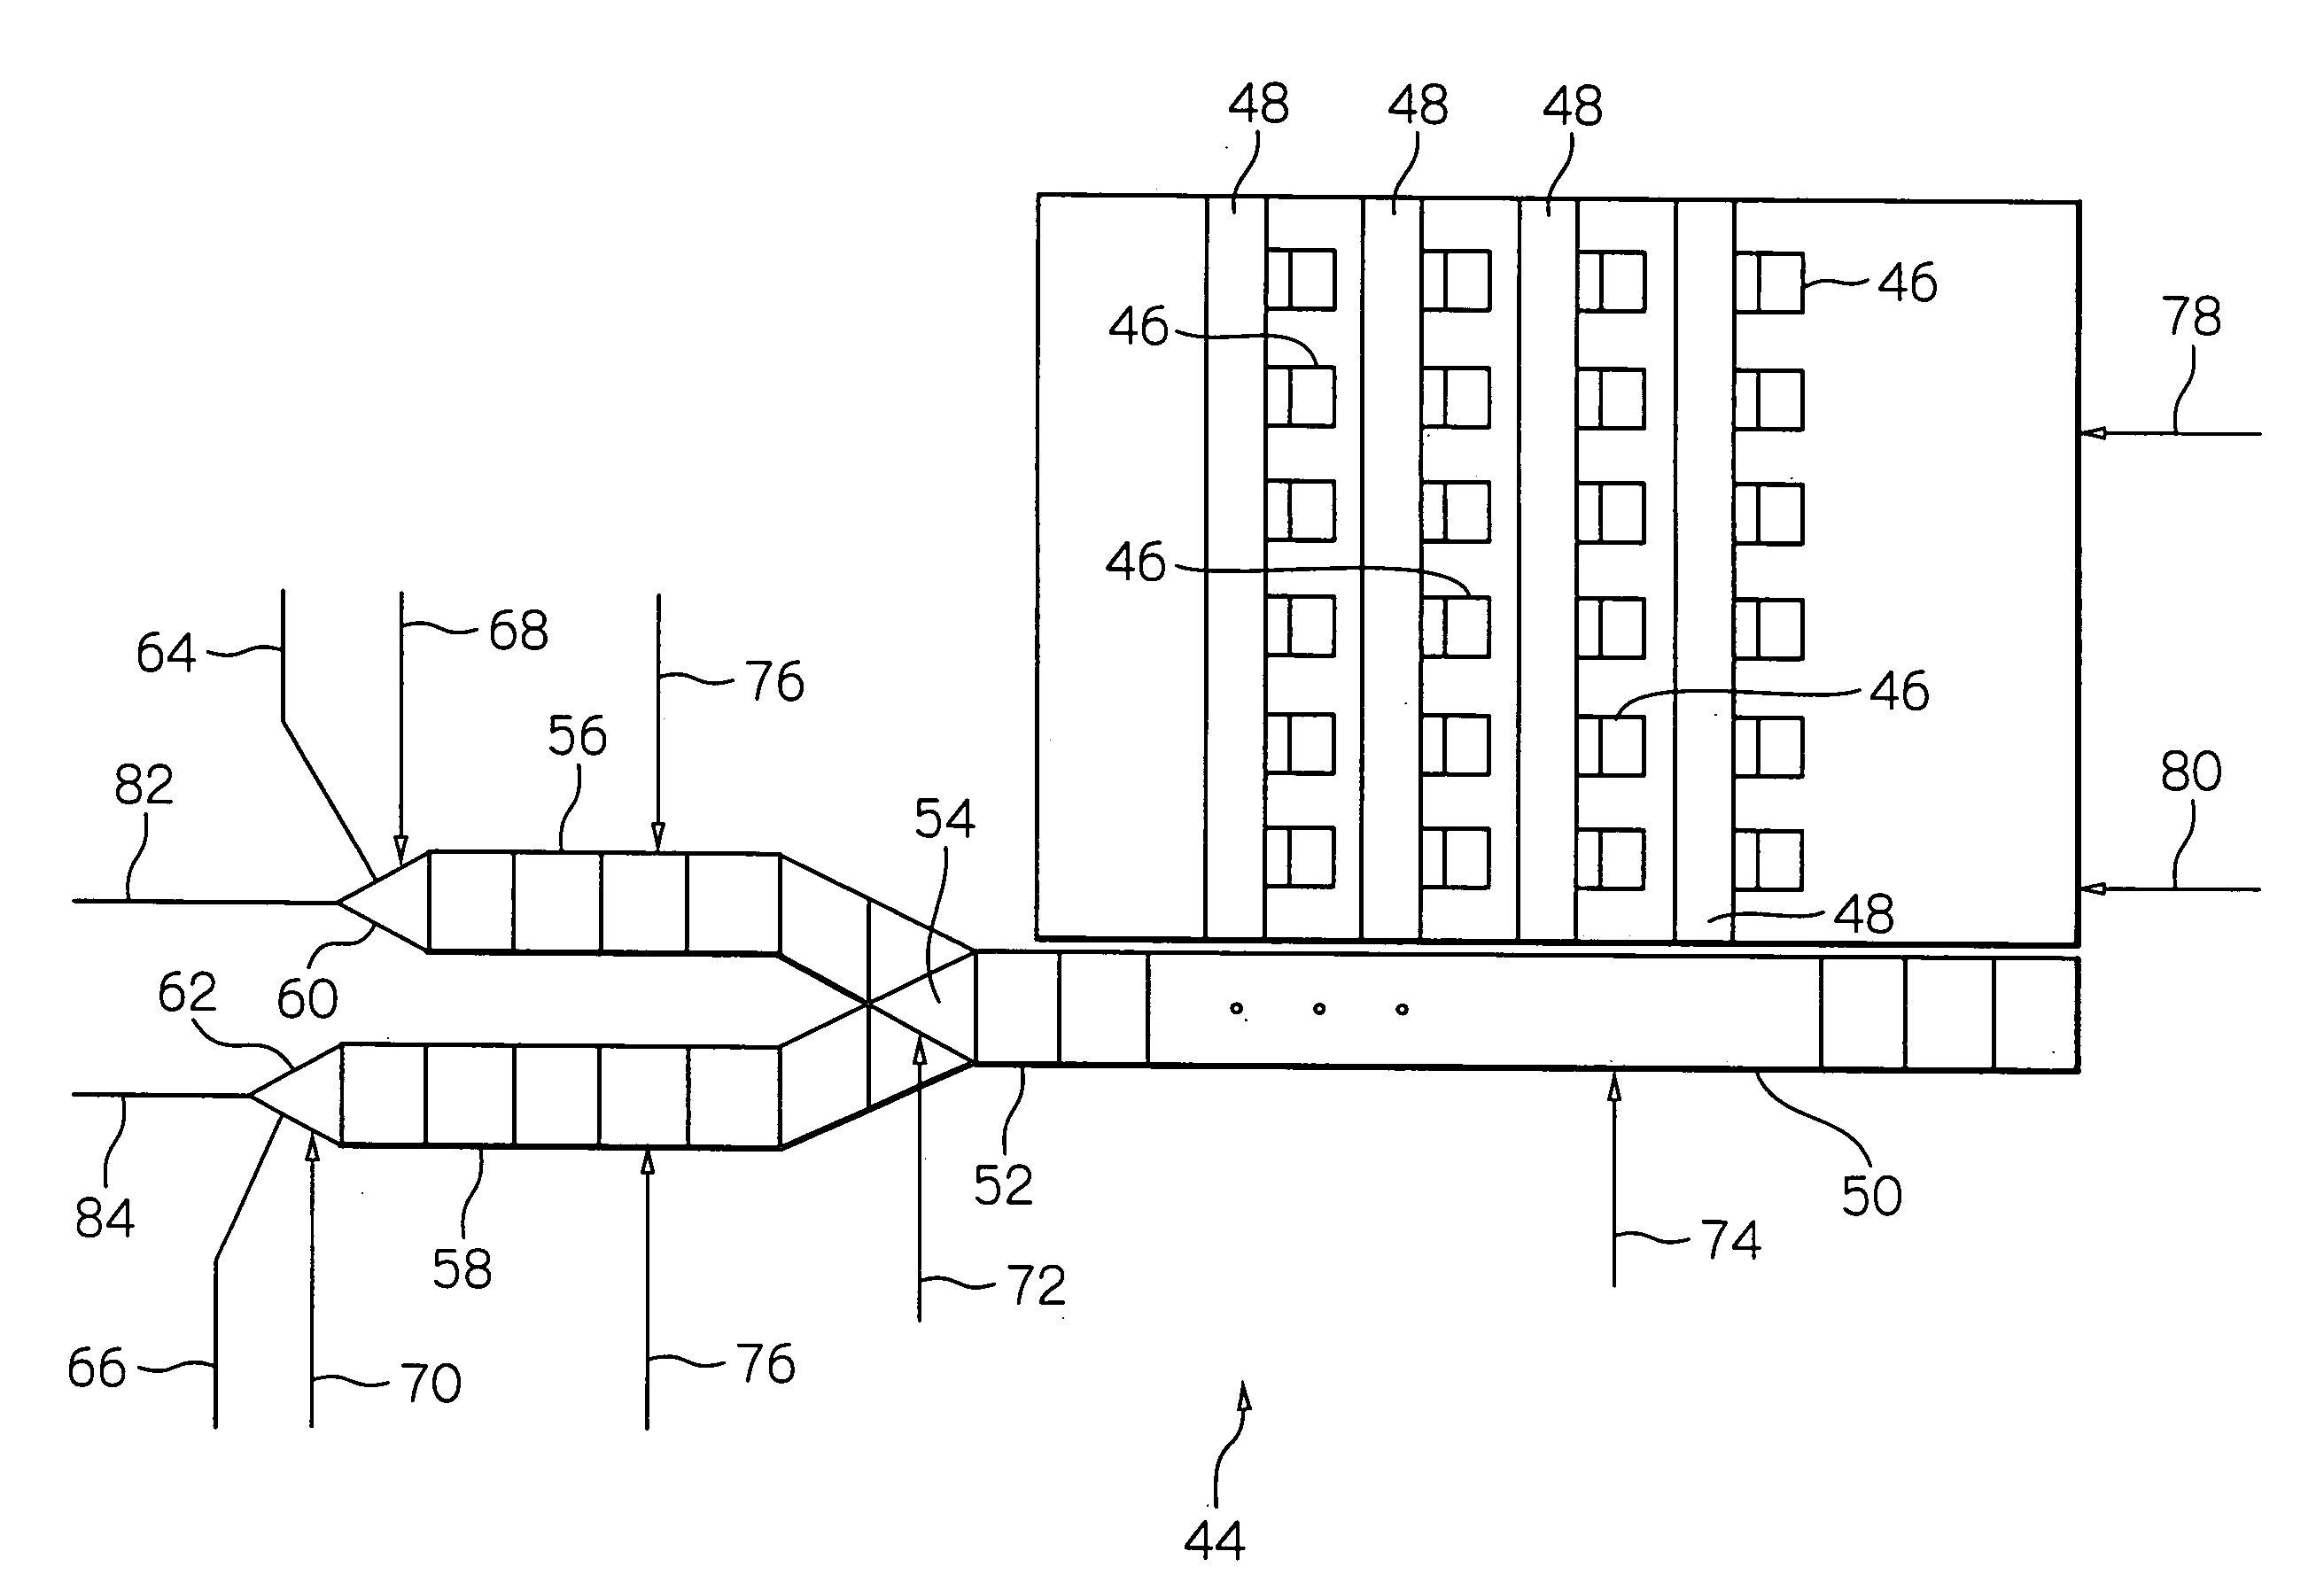 Solid state imaging device with horizontal transfer paths and a driving method therefor